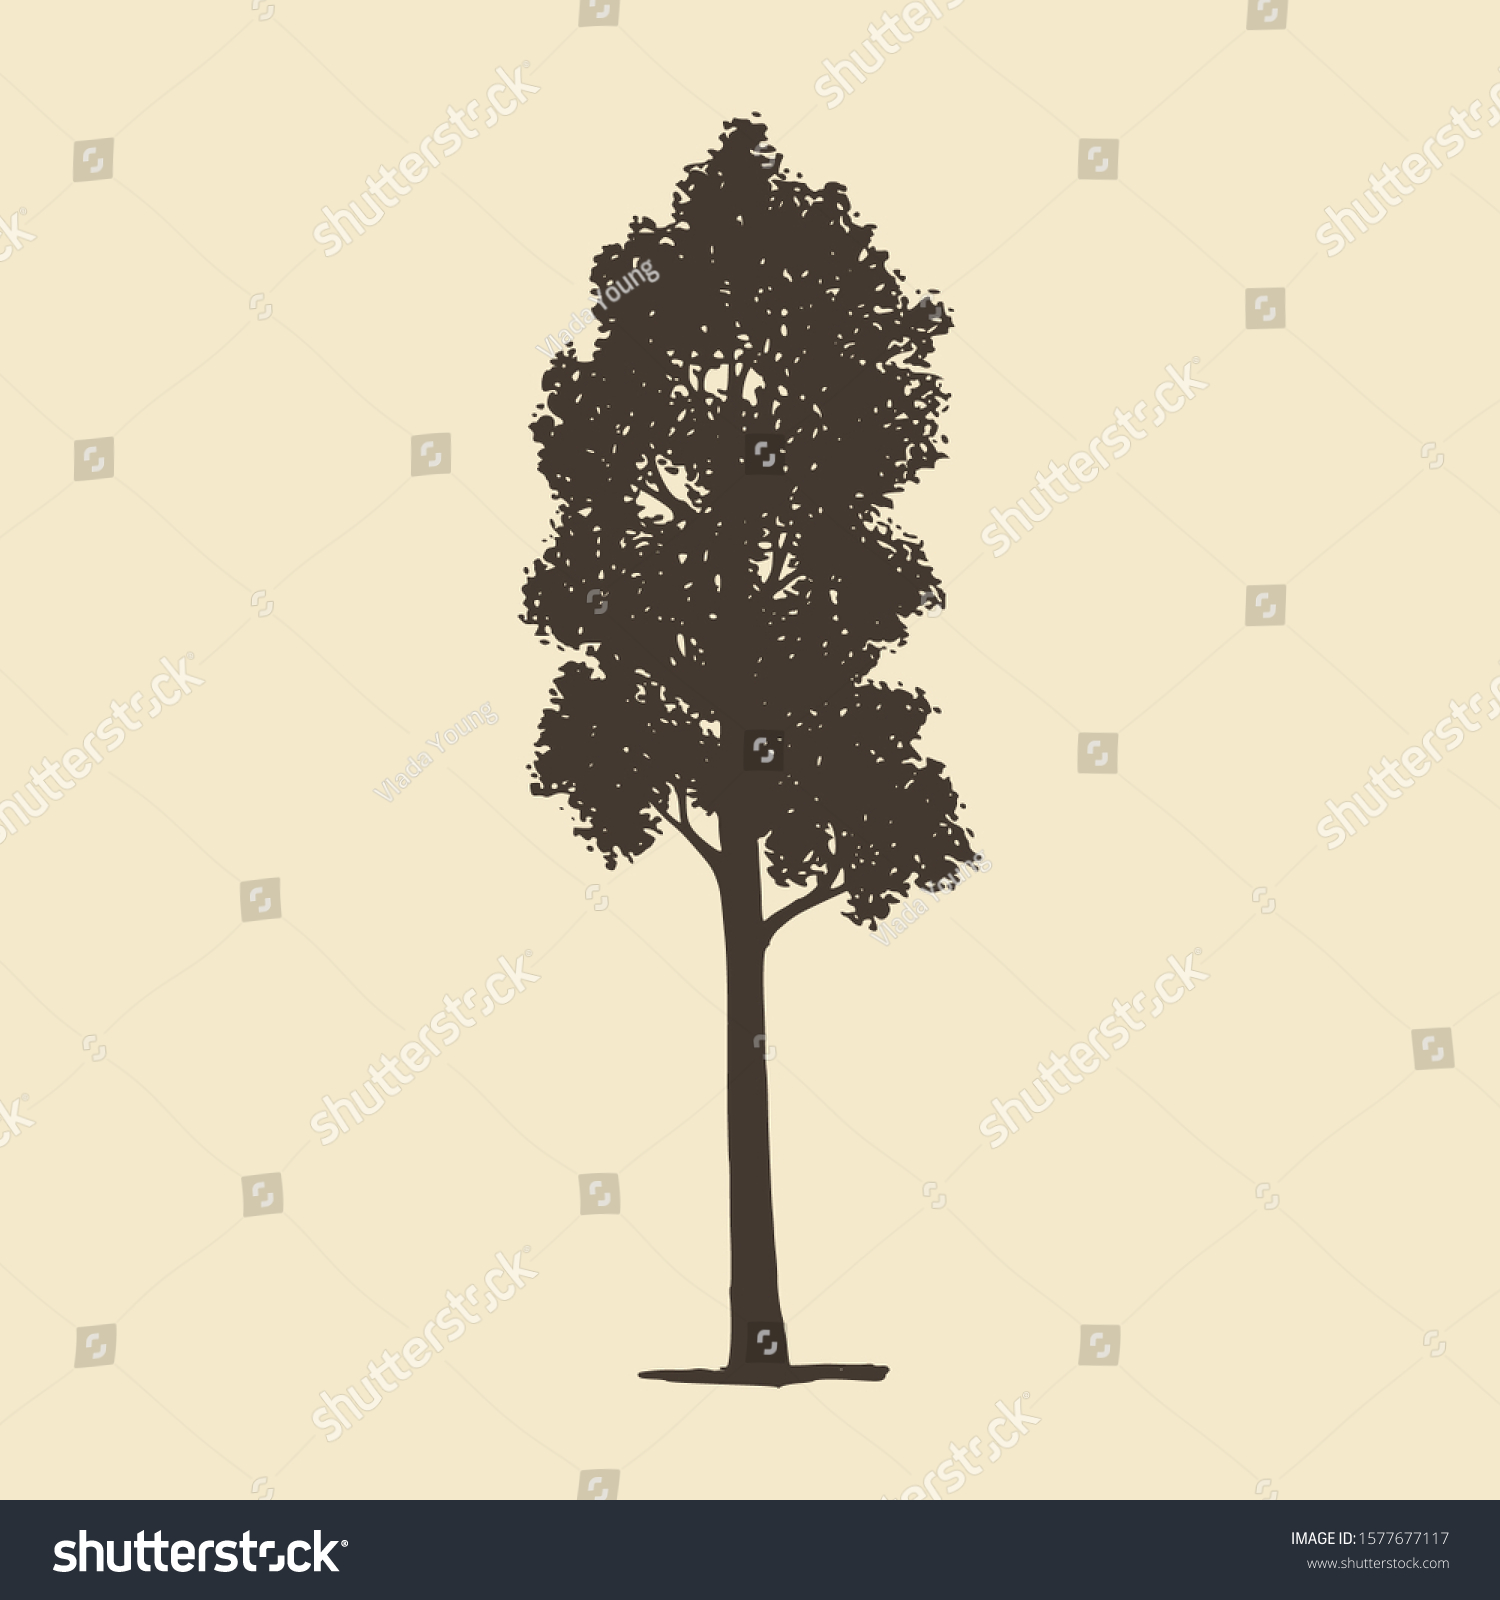 SVG of Aspen or Maple, hand drawn silhouette. Vector sketch of deciduous tree. svg